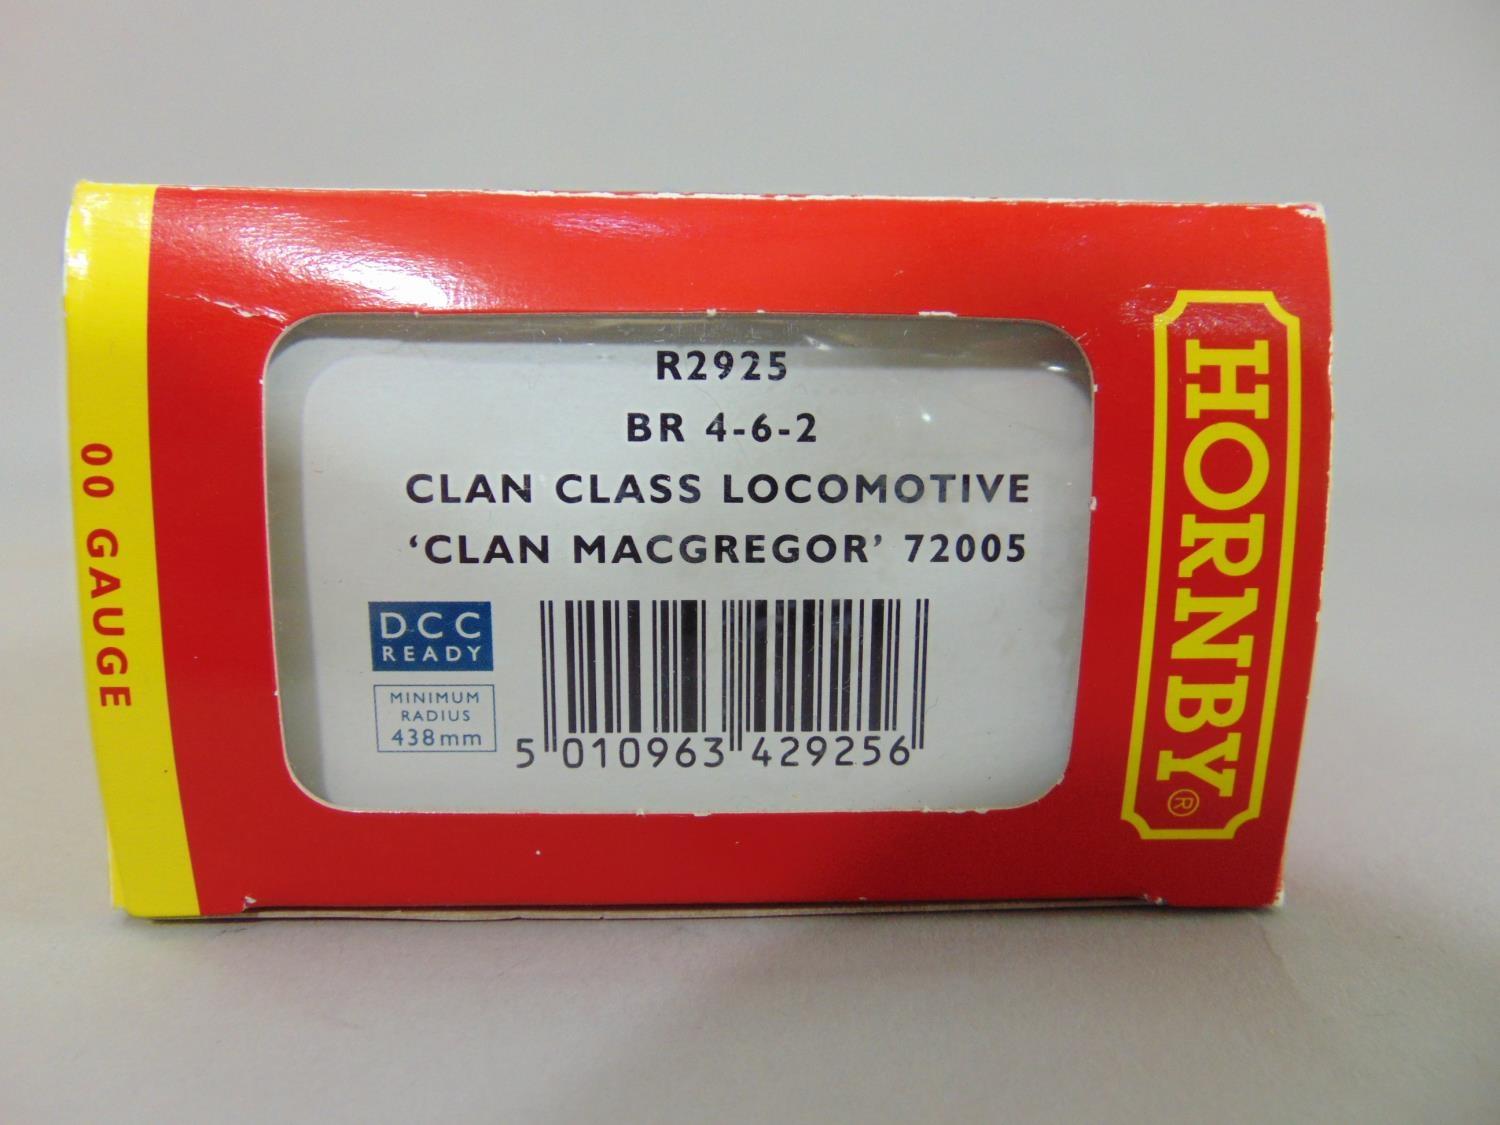 Hornby R2925 BR 4-6-2 Clan Class Locomotive 'Clan MacGregor' 72005, boxed with original packaging ( - Image 2 of 4